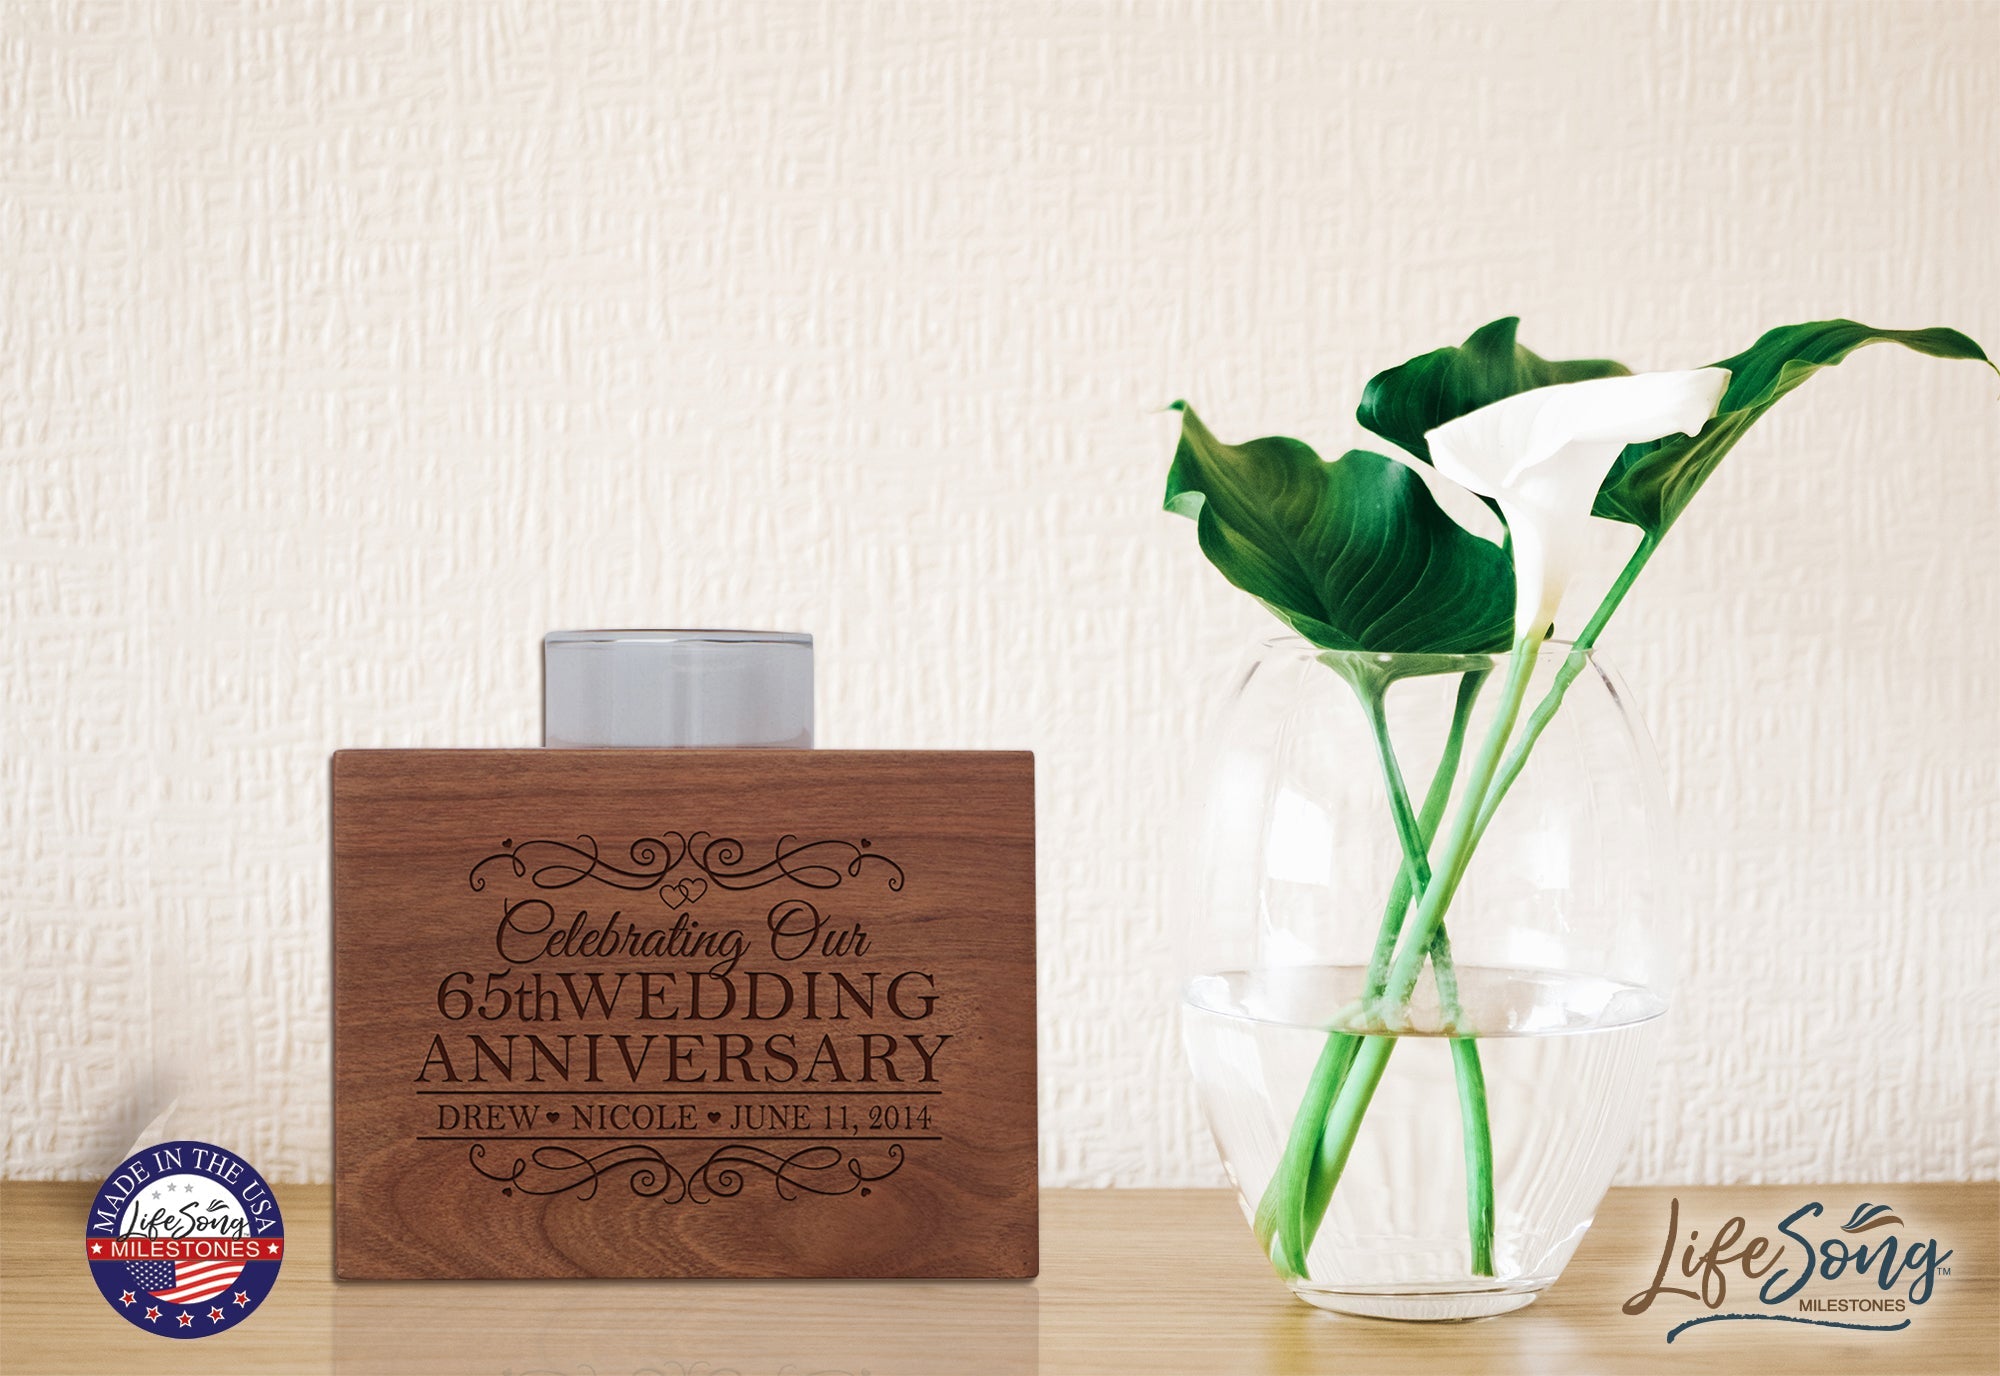 Personalized Cherry Wood Single Votive Candle Holder - 65th Wedding Anniversary - LifeSong Milestones